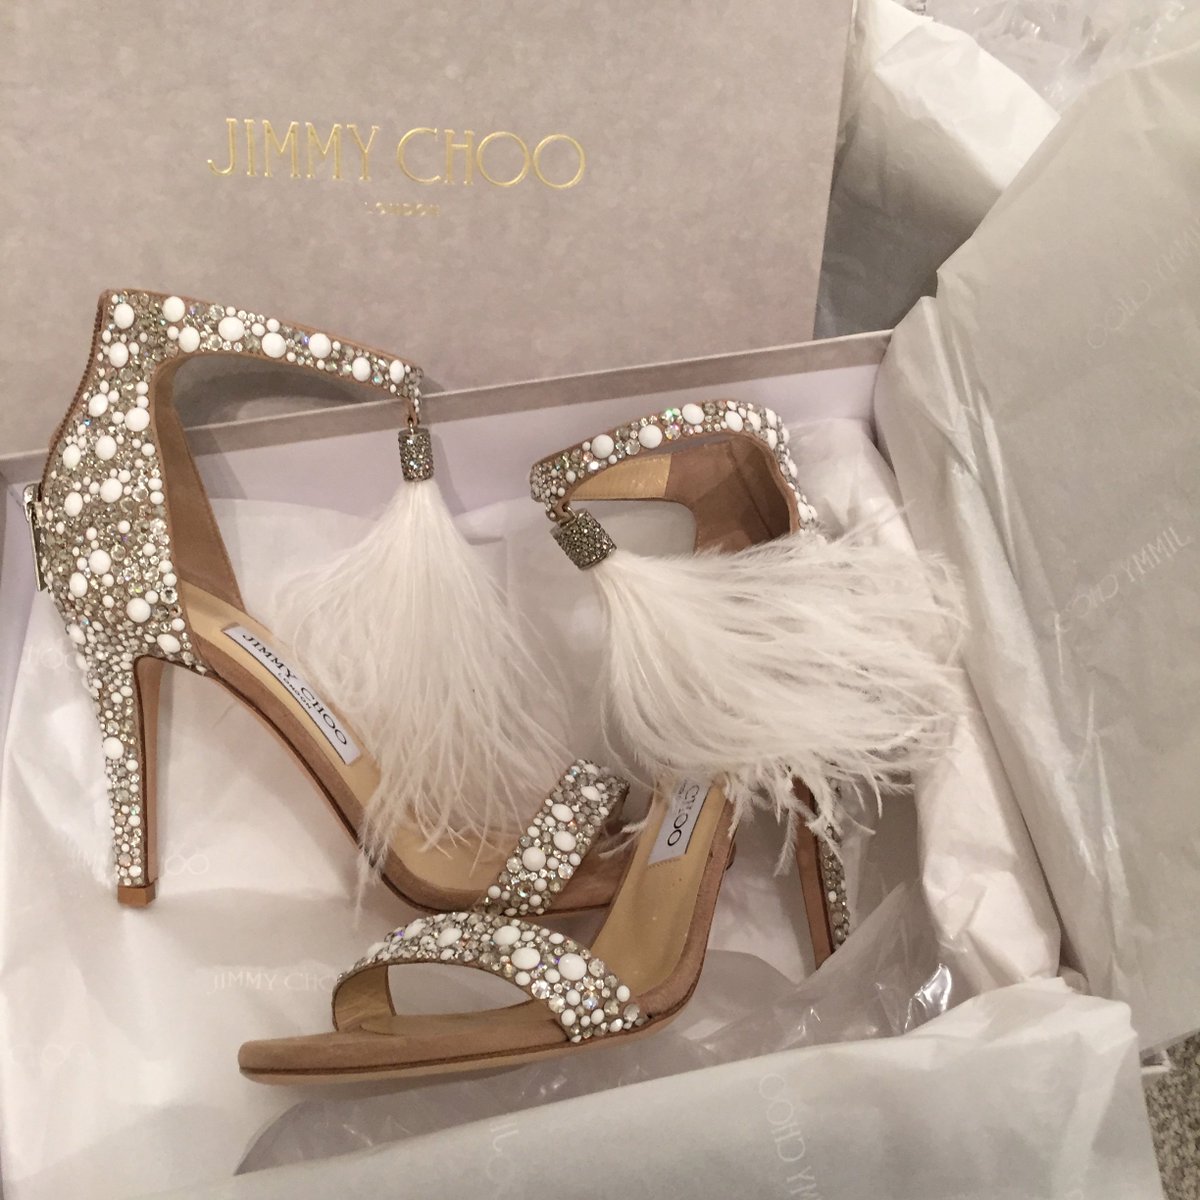 Say #IDOInChoo in these feathered beauties